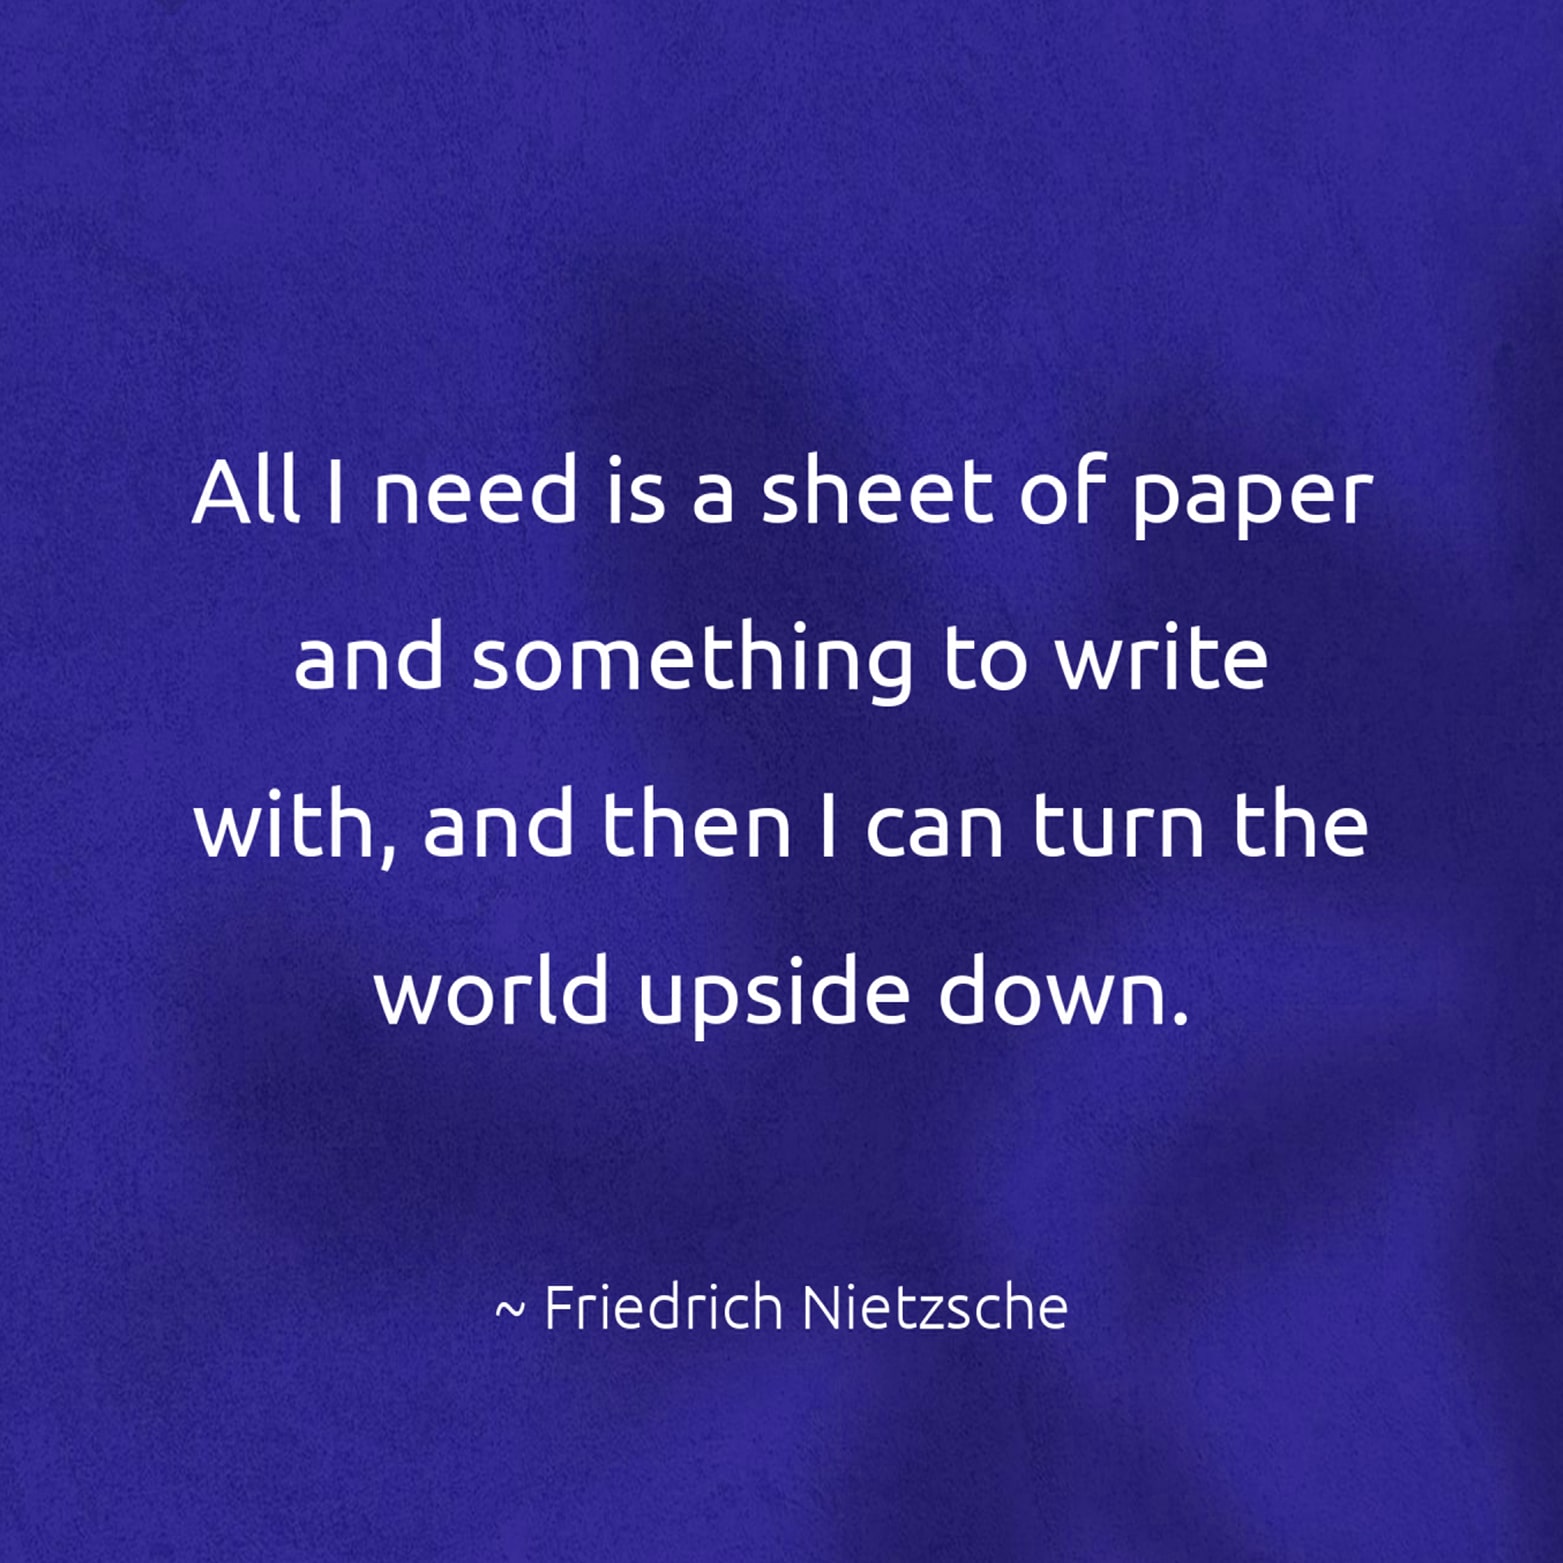 All I need is a sheet of paper and something to write with, and then I can turn the world upside down. - Friedrich Nietzsche